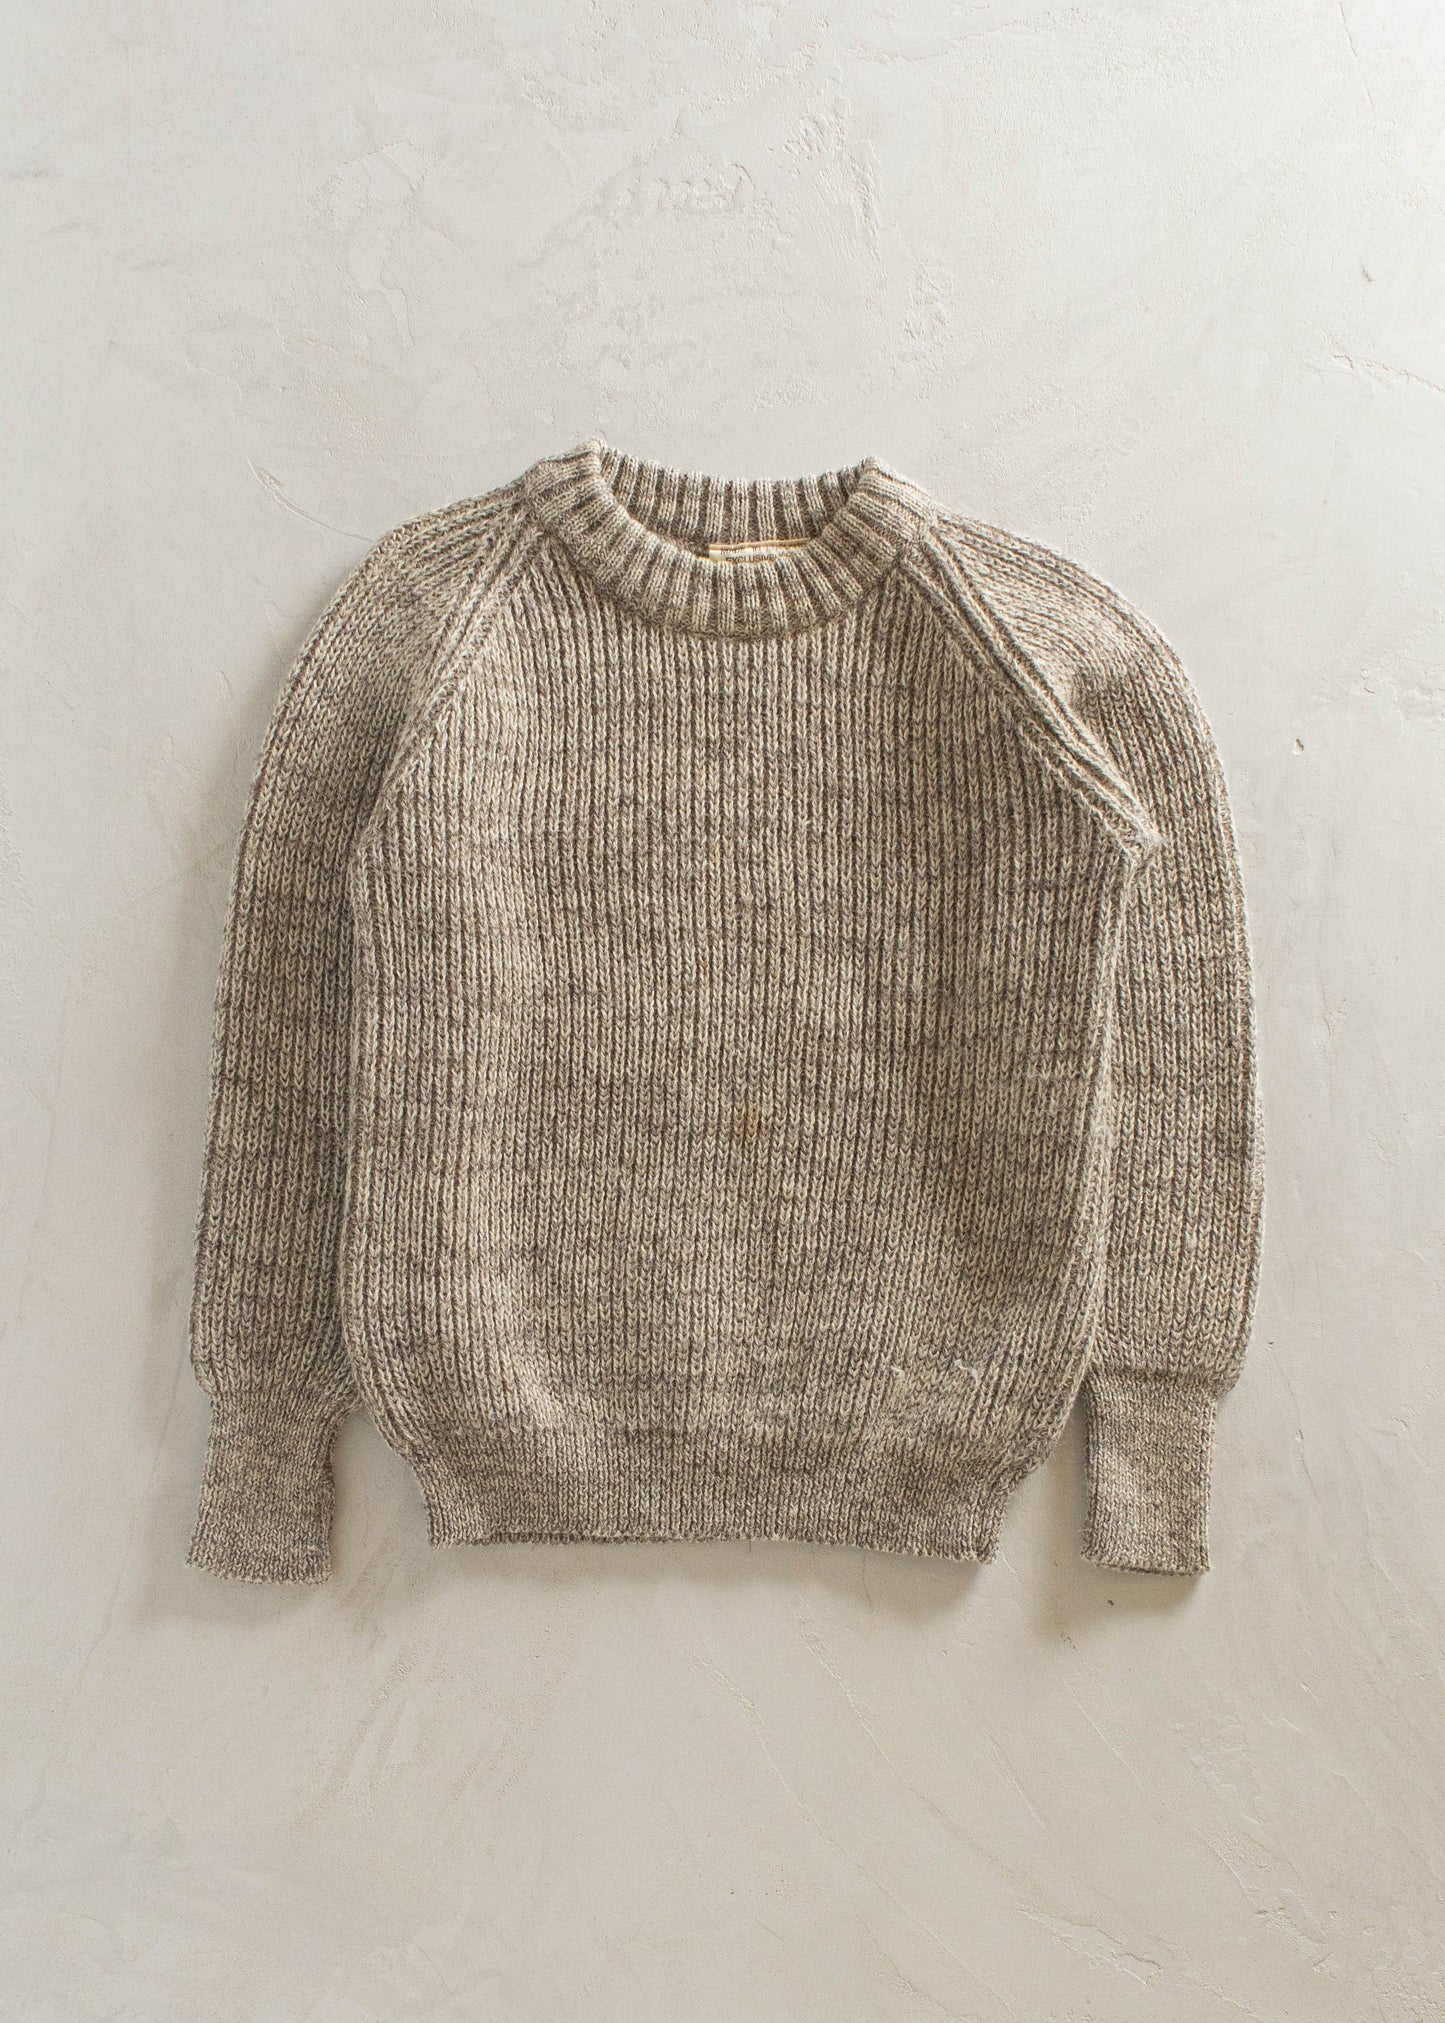 1980s John Clement Wool Pullover Sweater Size S/M